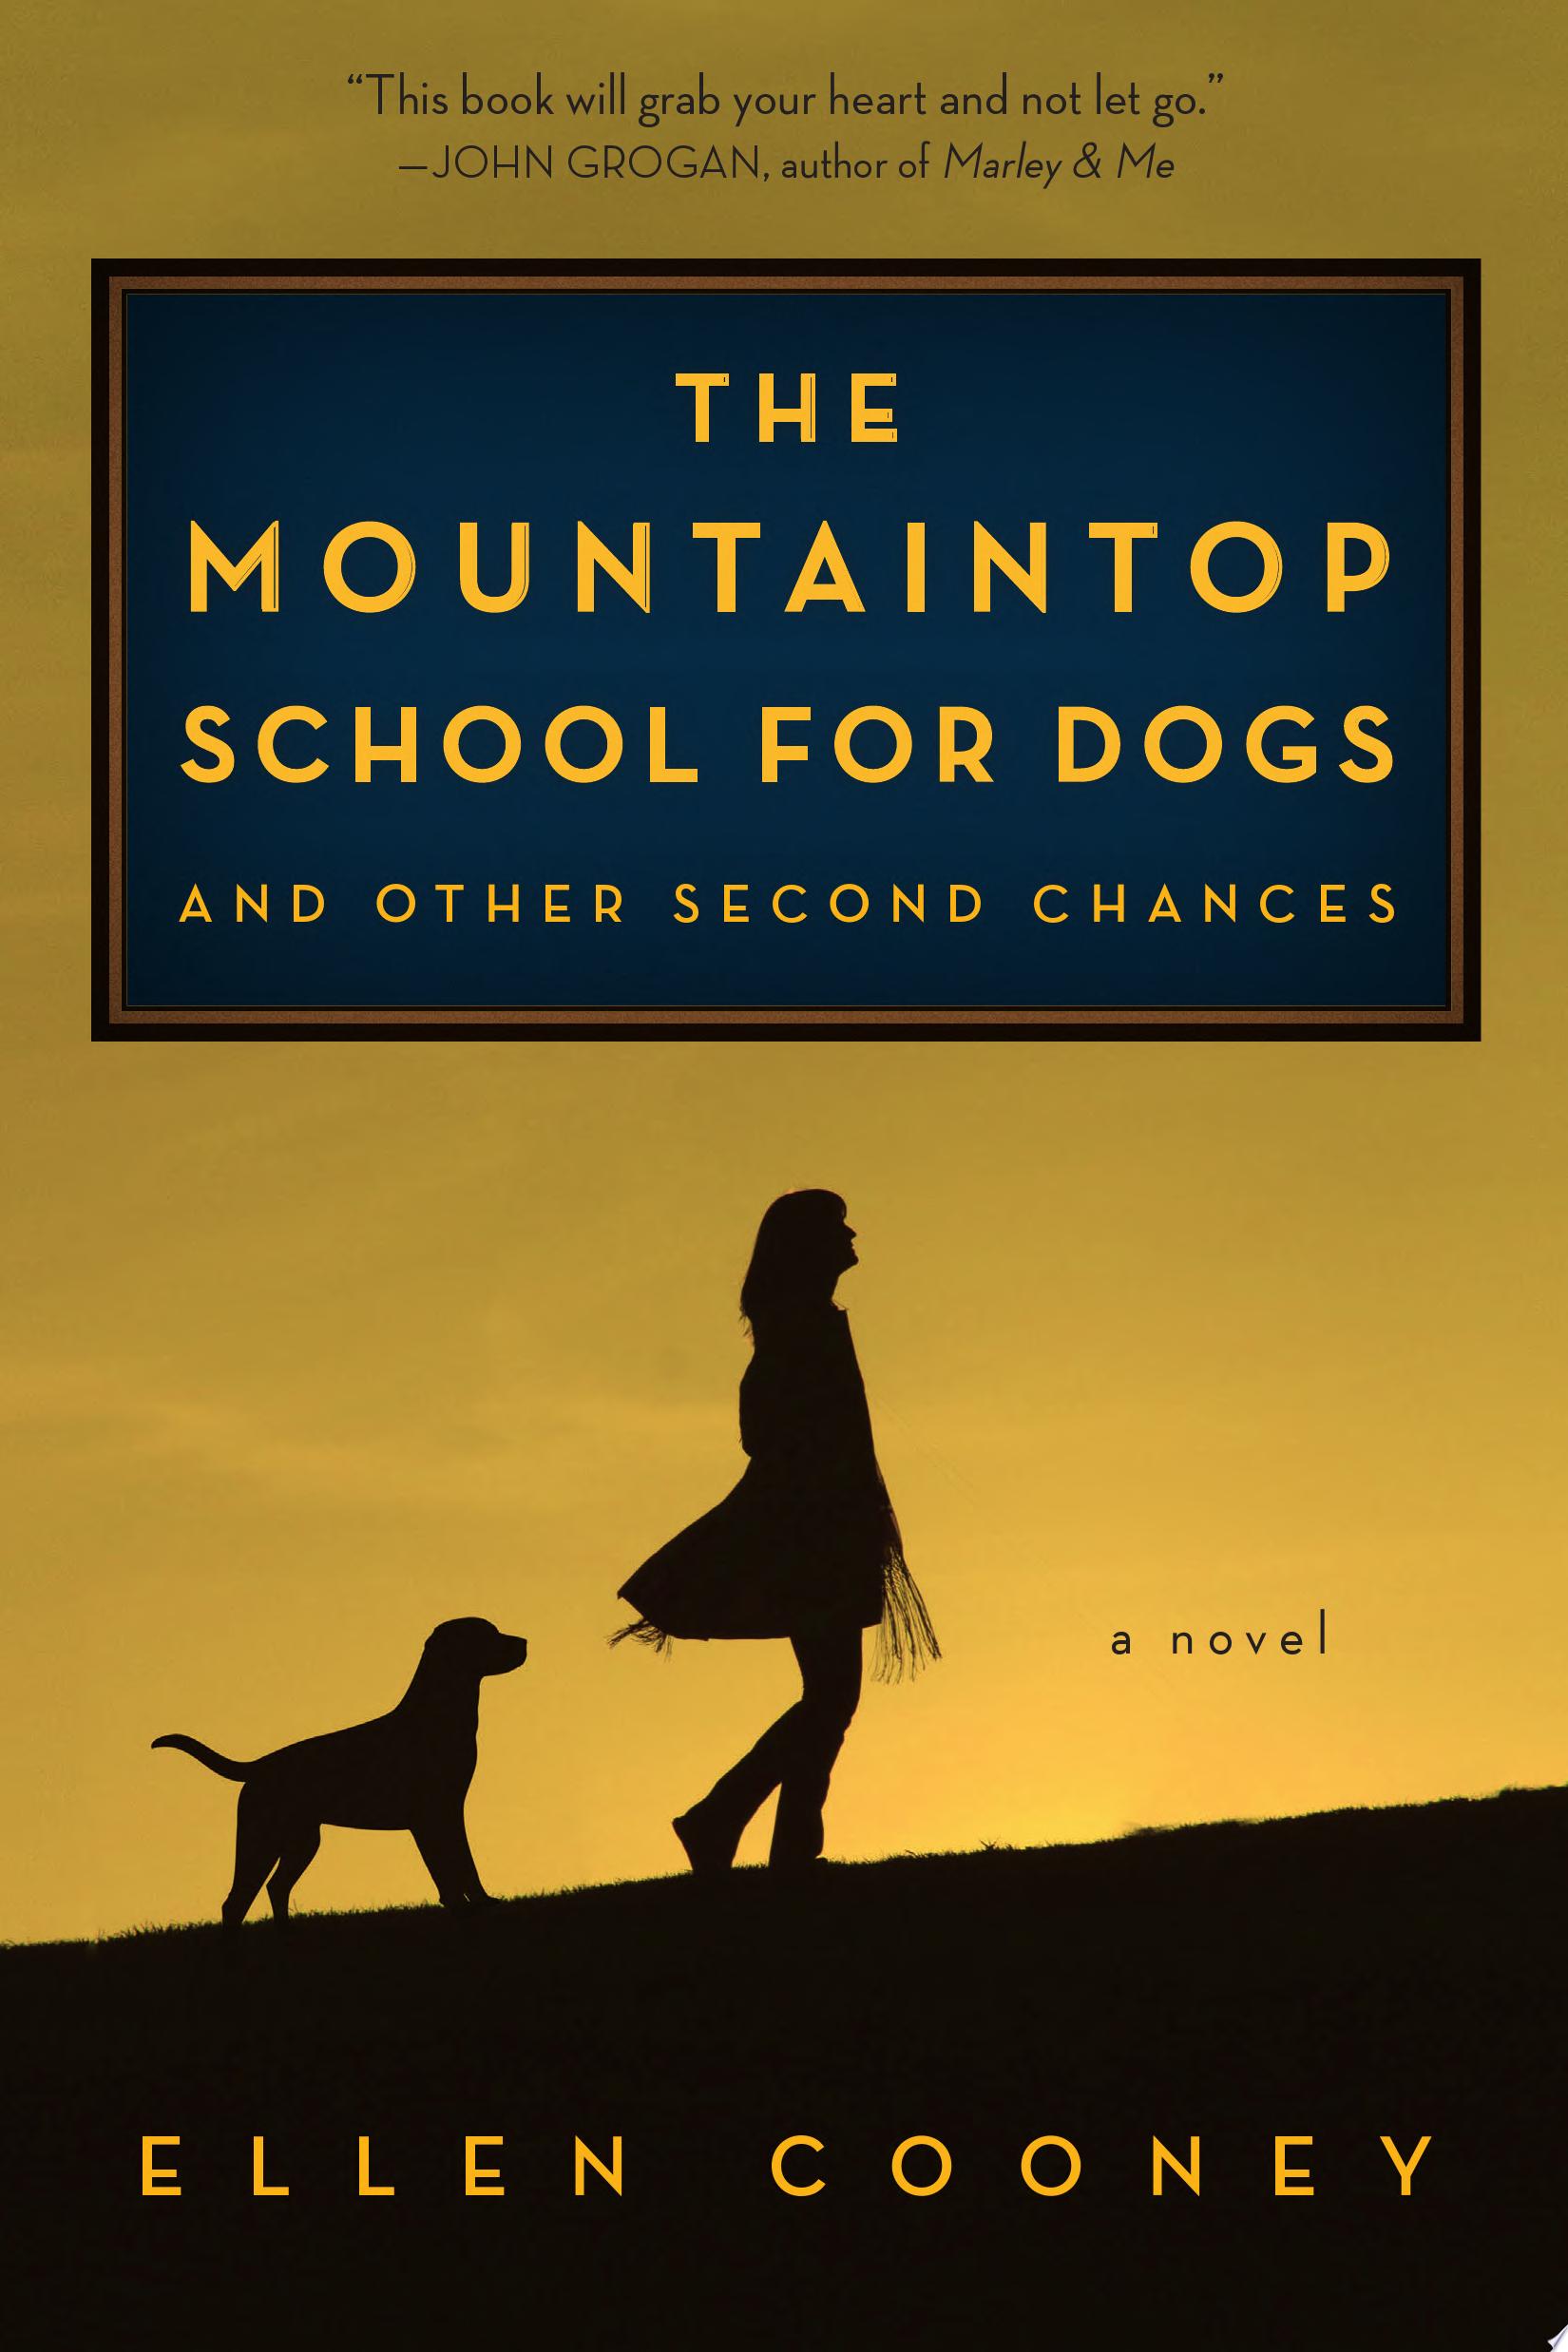 Image for "The Mountaintop School for Dogs and Other Second Chances"